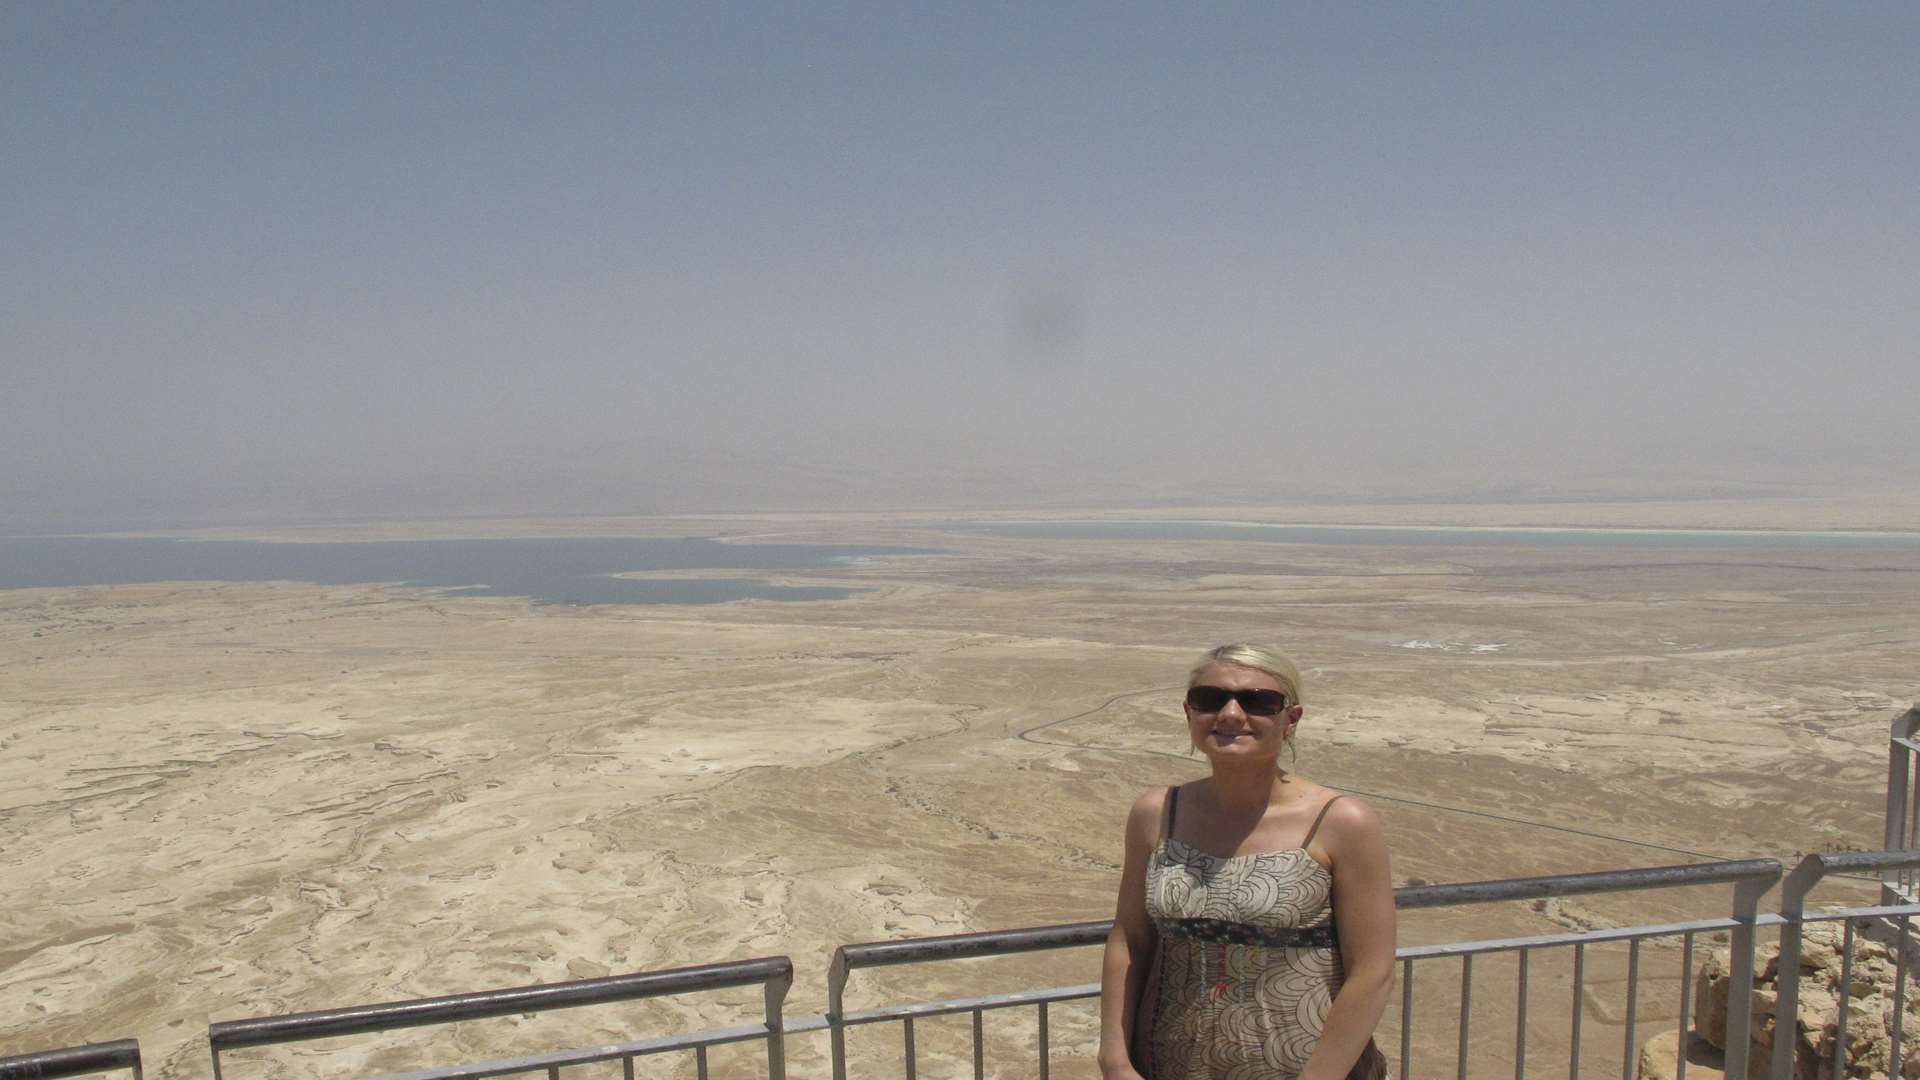 View from Masada, across the desert, to the Dead Sea